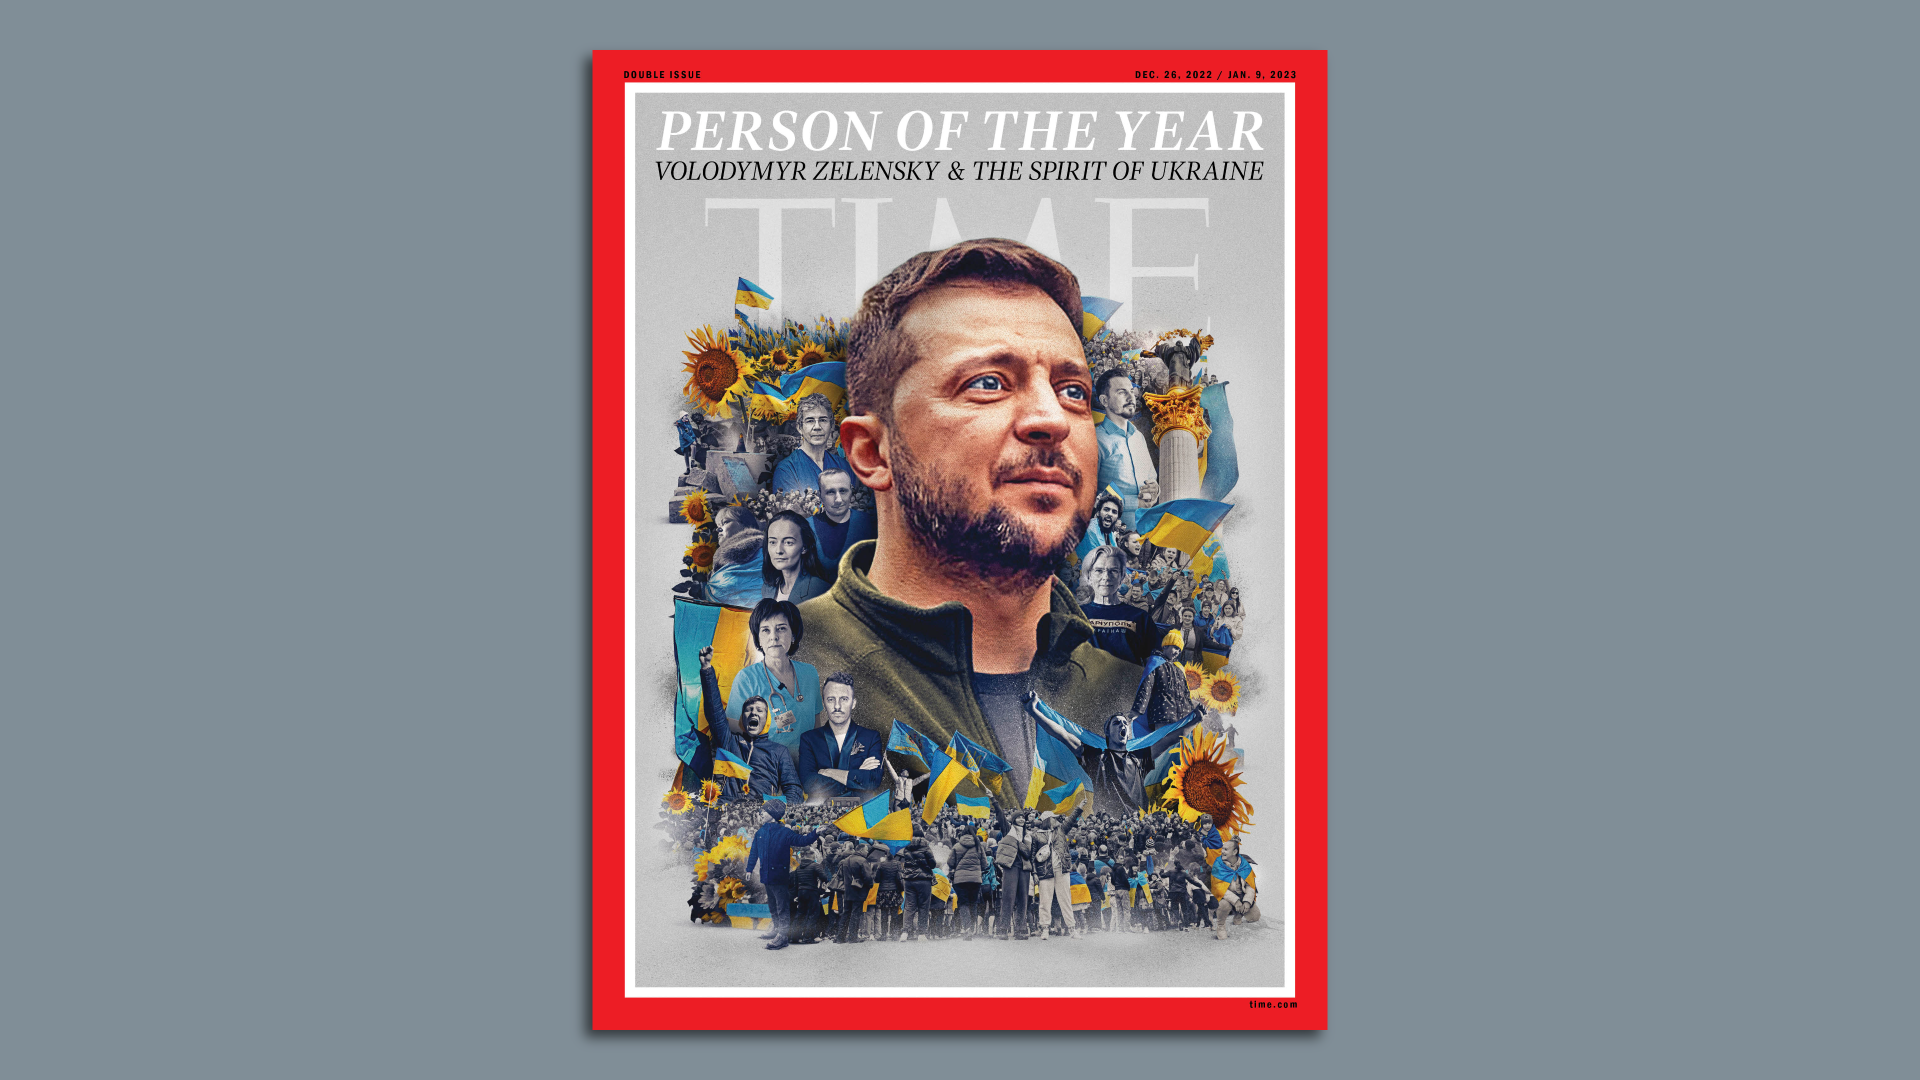 Ukrainian President Volodymyr Zelensky is TIME's Person of the Year. Photo courtesy of Time